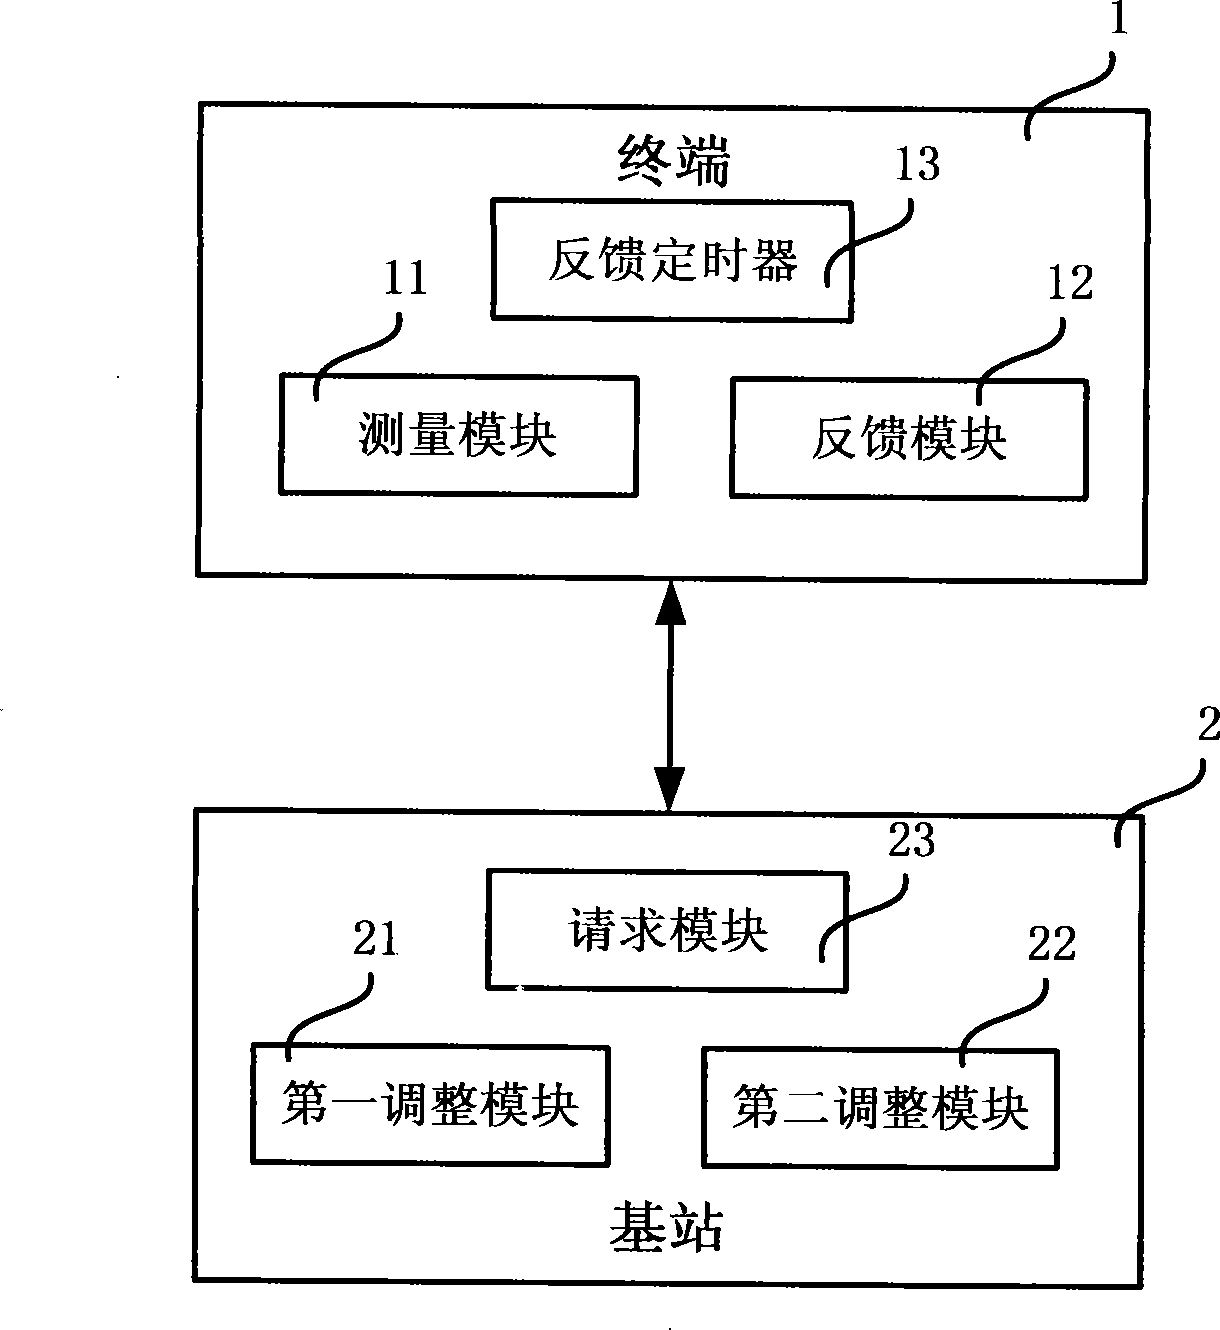 Wireless network medium access control system and channel parameter regulation method